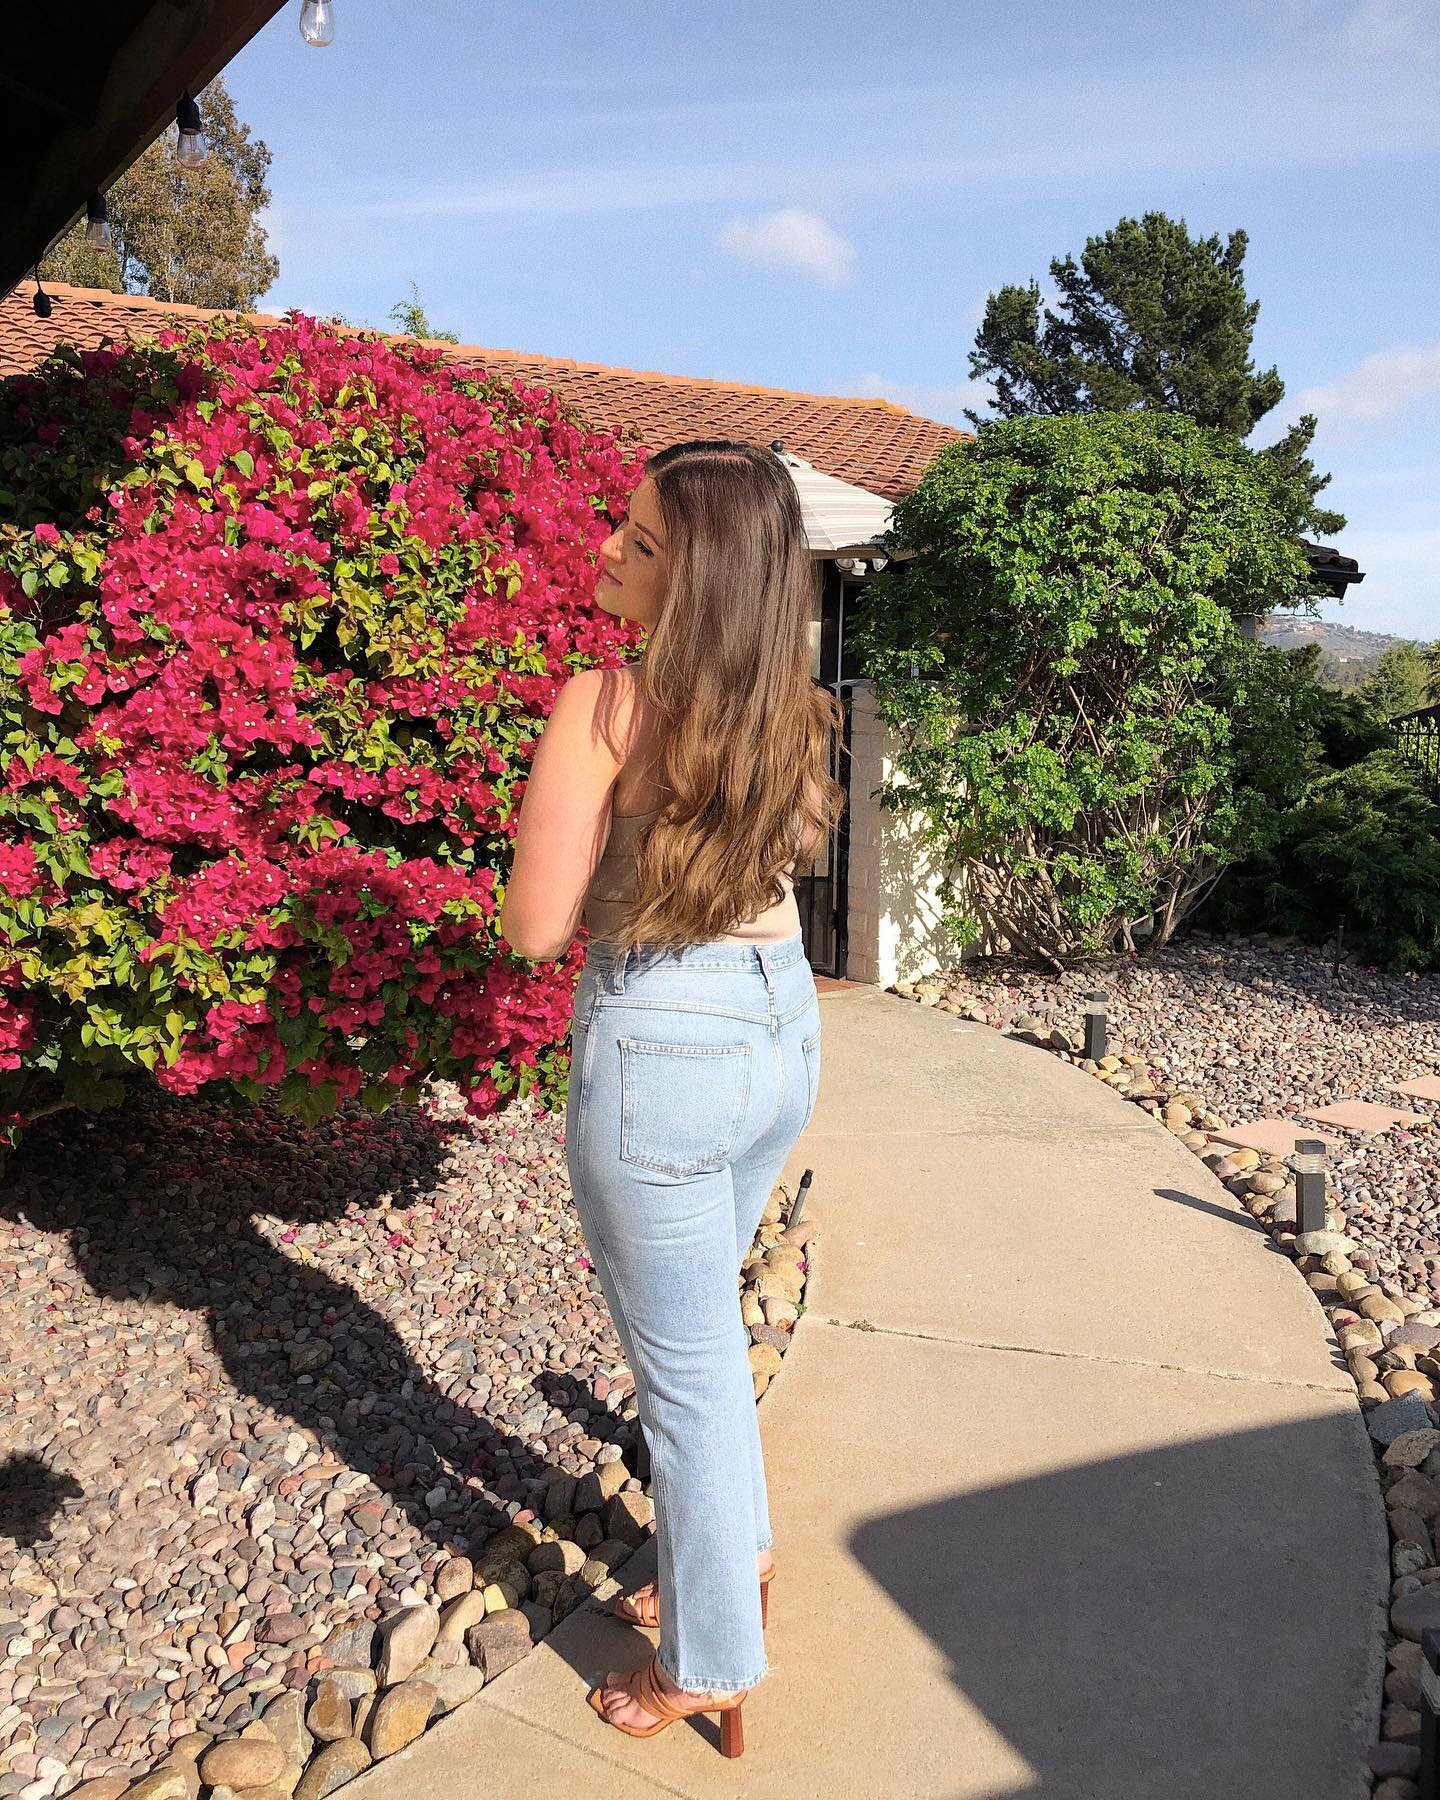 This denim &gt;&gt;&gt; linked here: http://liketk.it/3iGSa
.
.
.
.

#parisianvibes #summervibes #cottagecore #aestheticposts #feminineaesthetic #parisianchic #becauseofvogue #agoldejeans #agolde #parisianstyle #frenchmood #californiablogger #laviepa